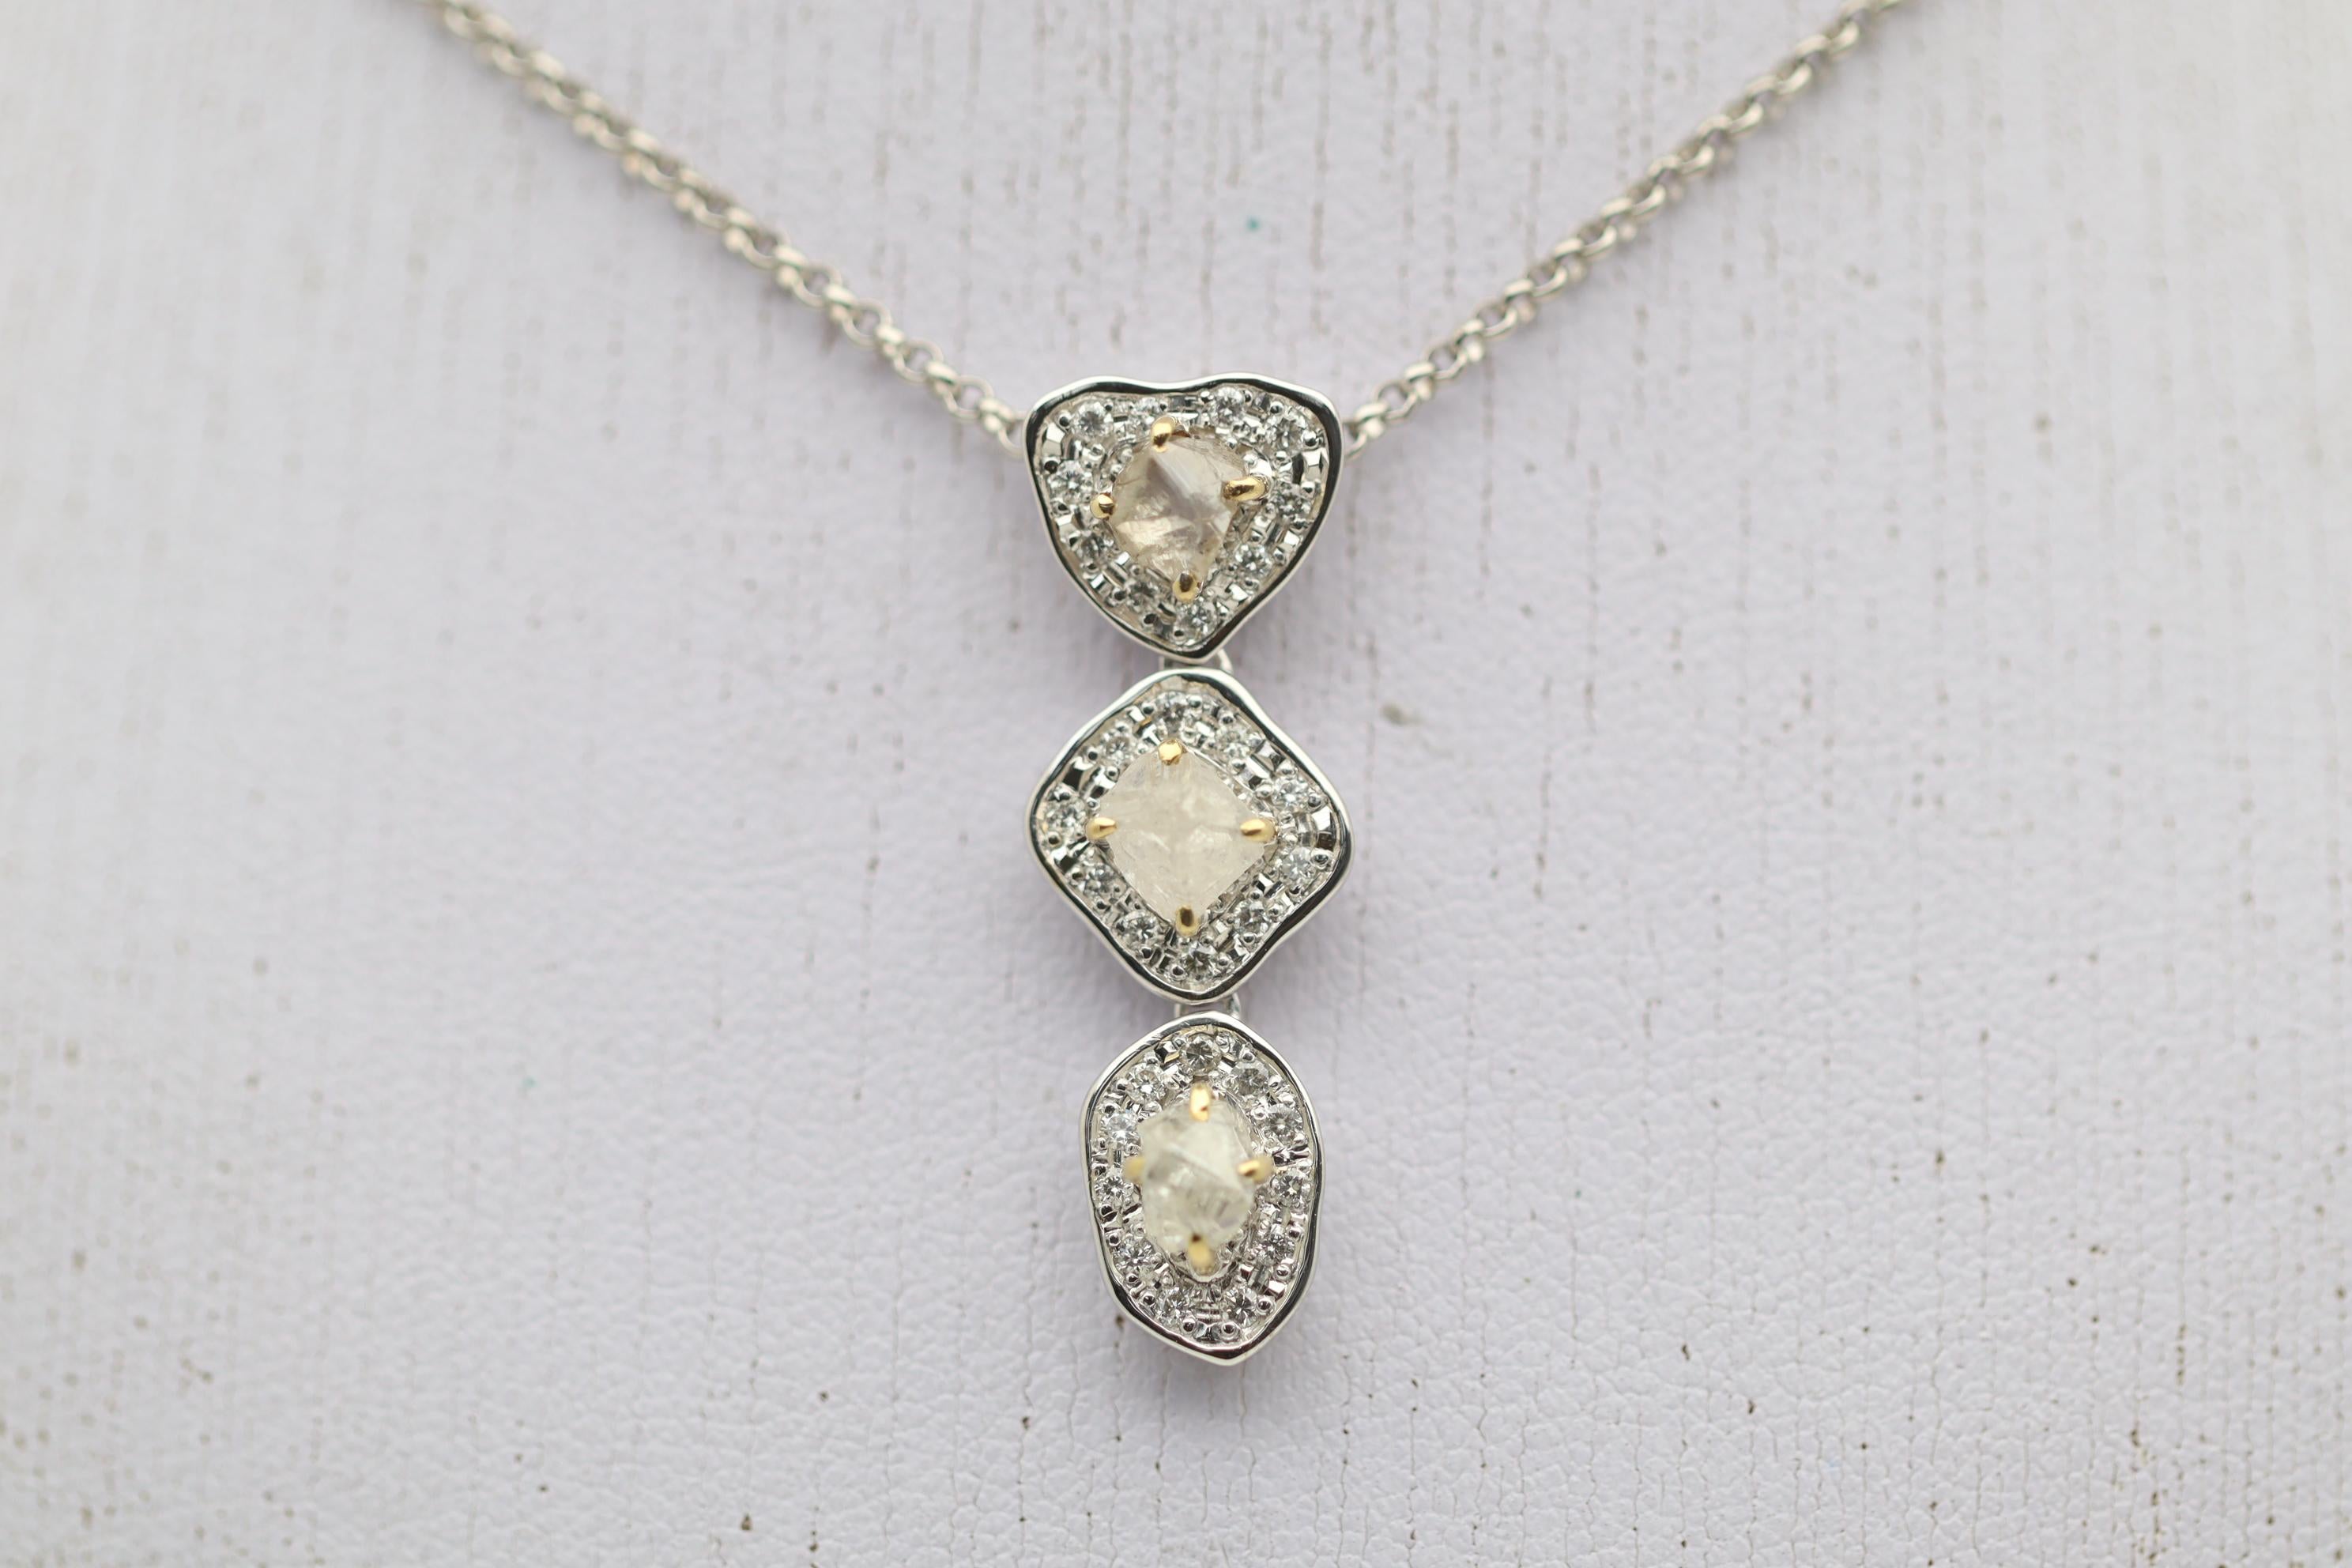 A unique, stylish and simply cool pendant featuring both traditional round brilliant-cut diamonds along with 3 rough diamonds! Rough diamonds are simply diamonds before they are cut or polished. They are in their natural form from when they are